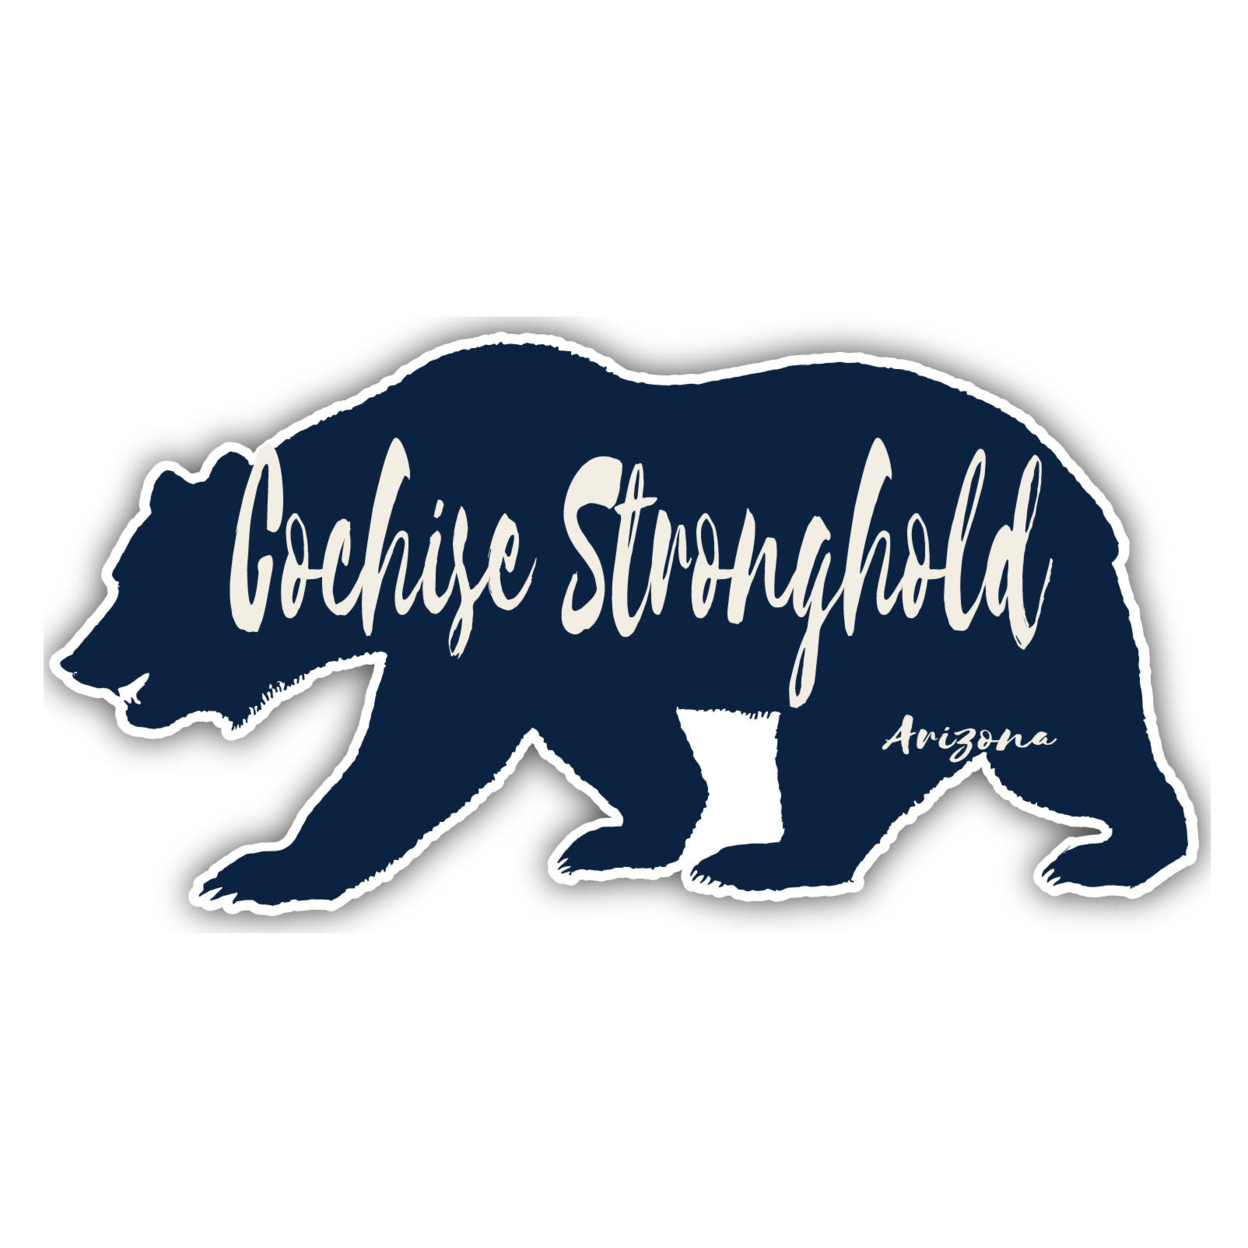 Cochise Stronghold Arizona Souvenir Decorative Stickers (Choose Theme And Size) - 4-Pack, 10-Inch, Bear